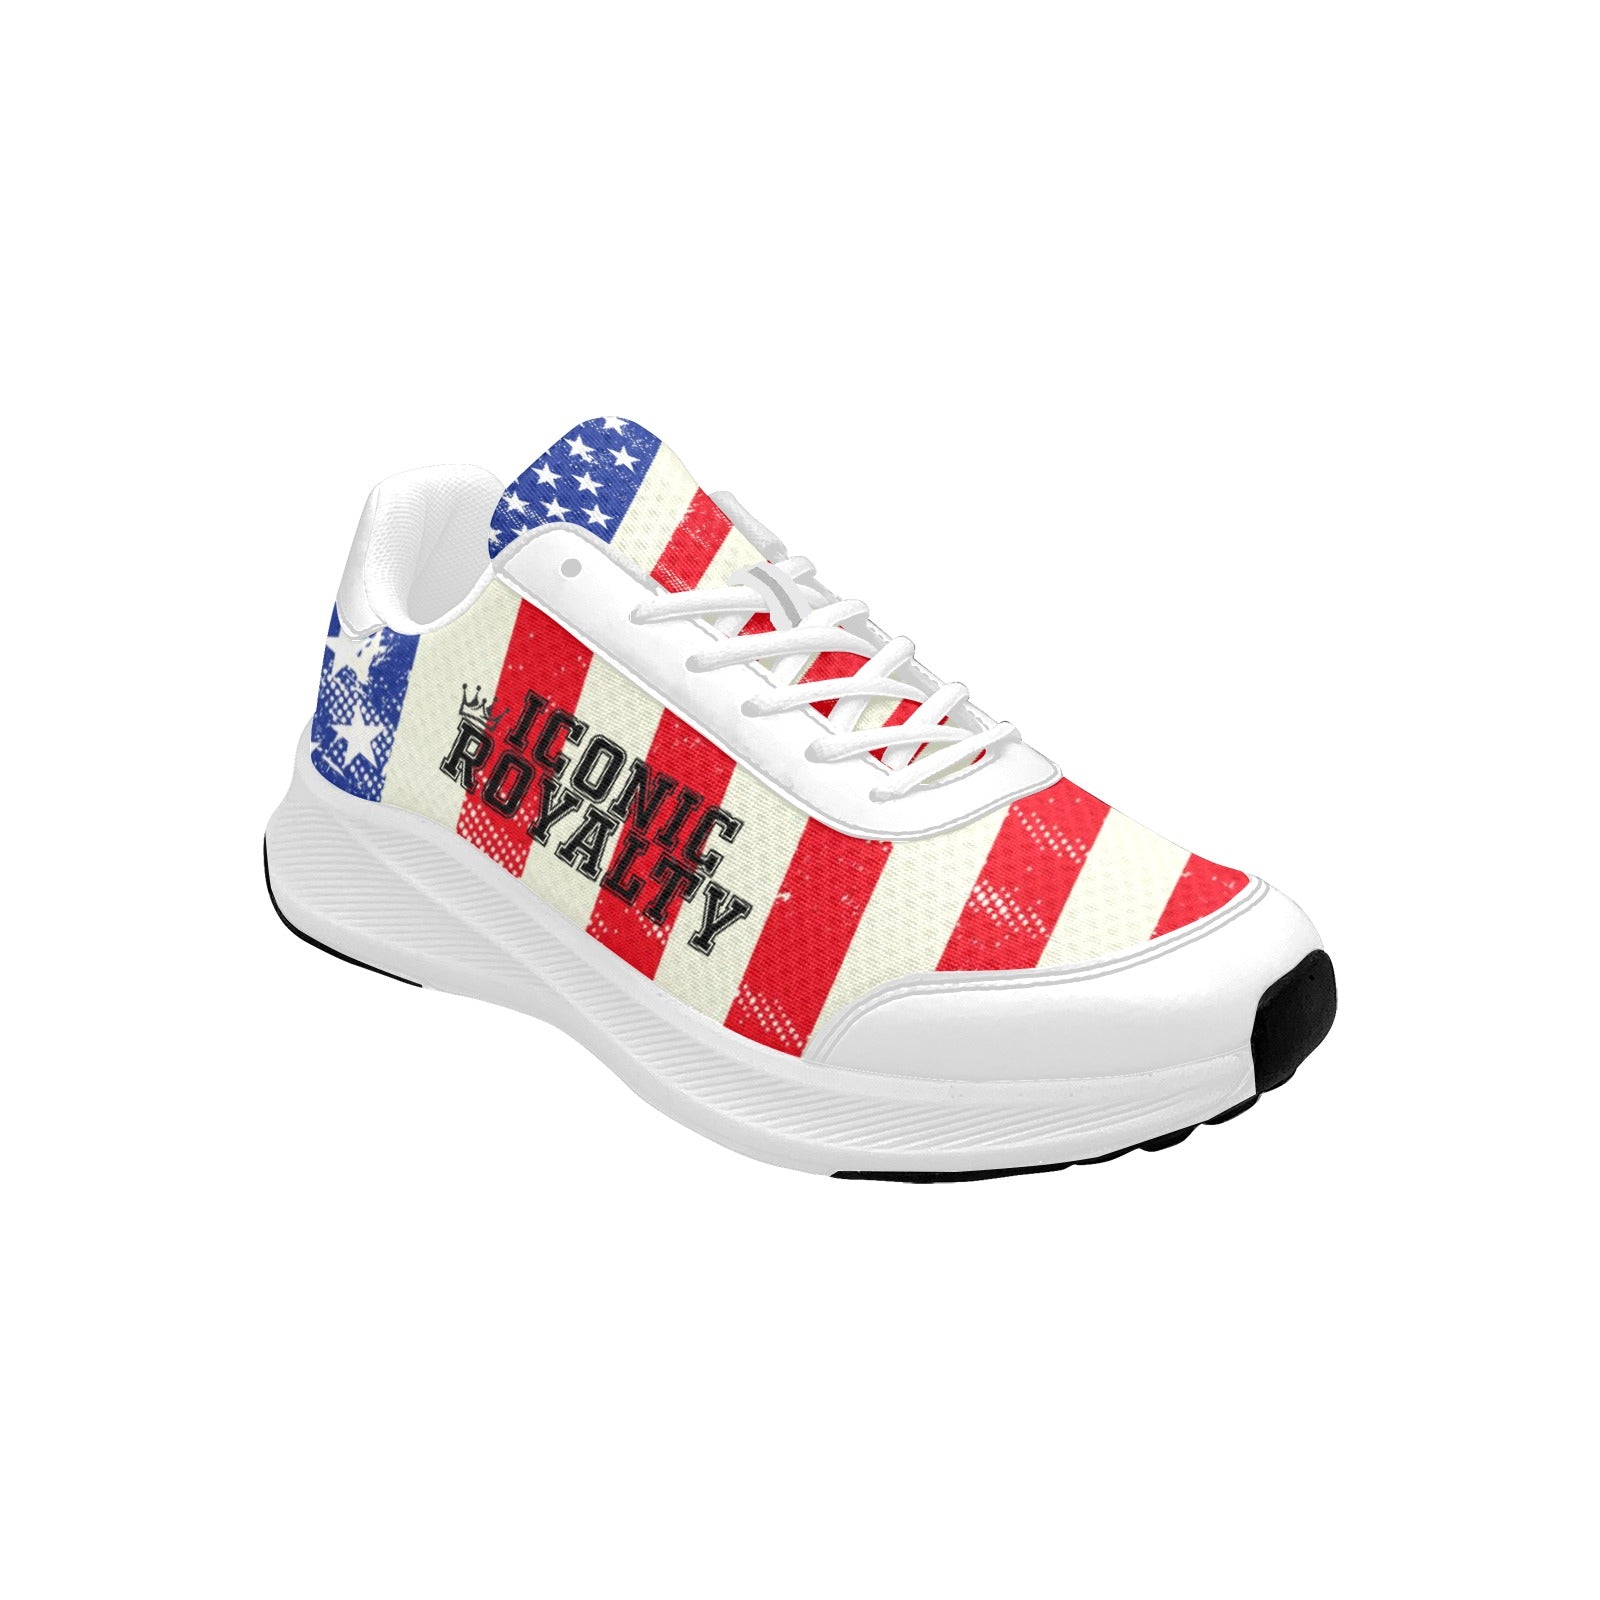 Iconic Royalty American Flag Mudguard Running Shoes